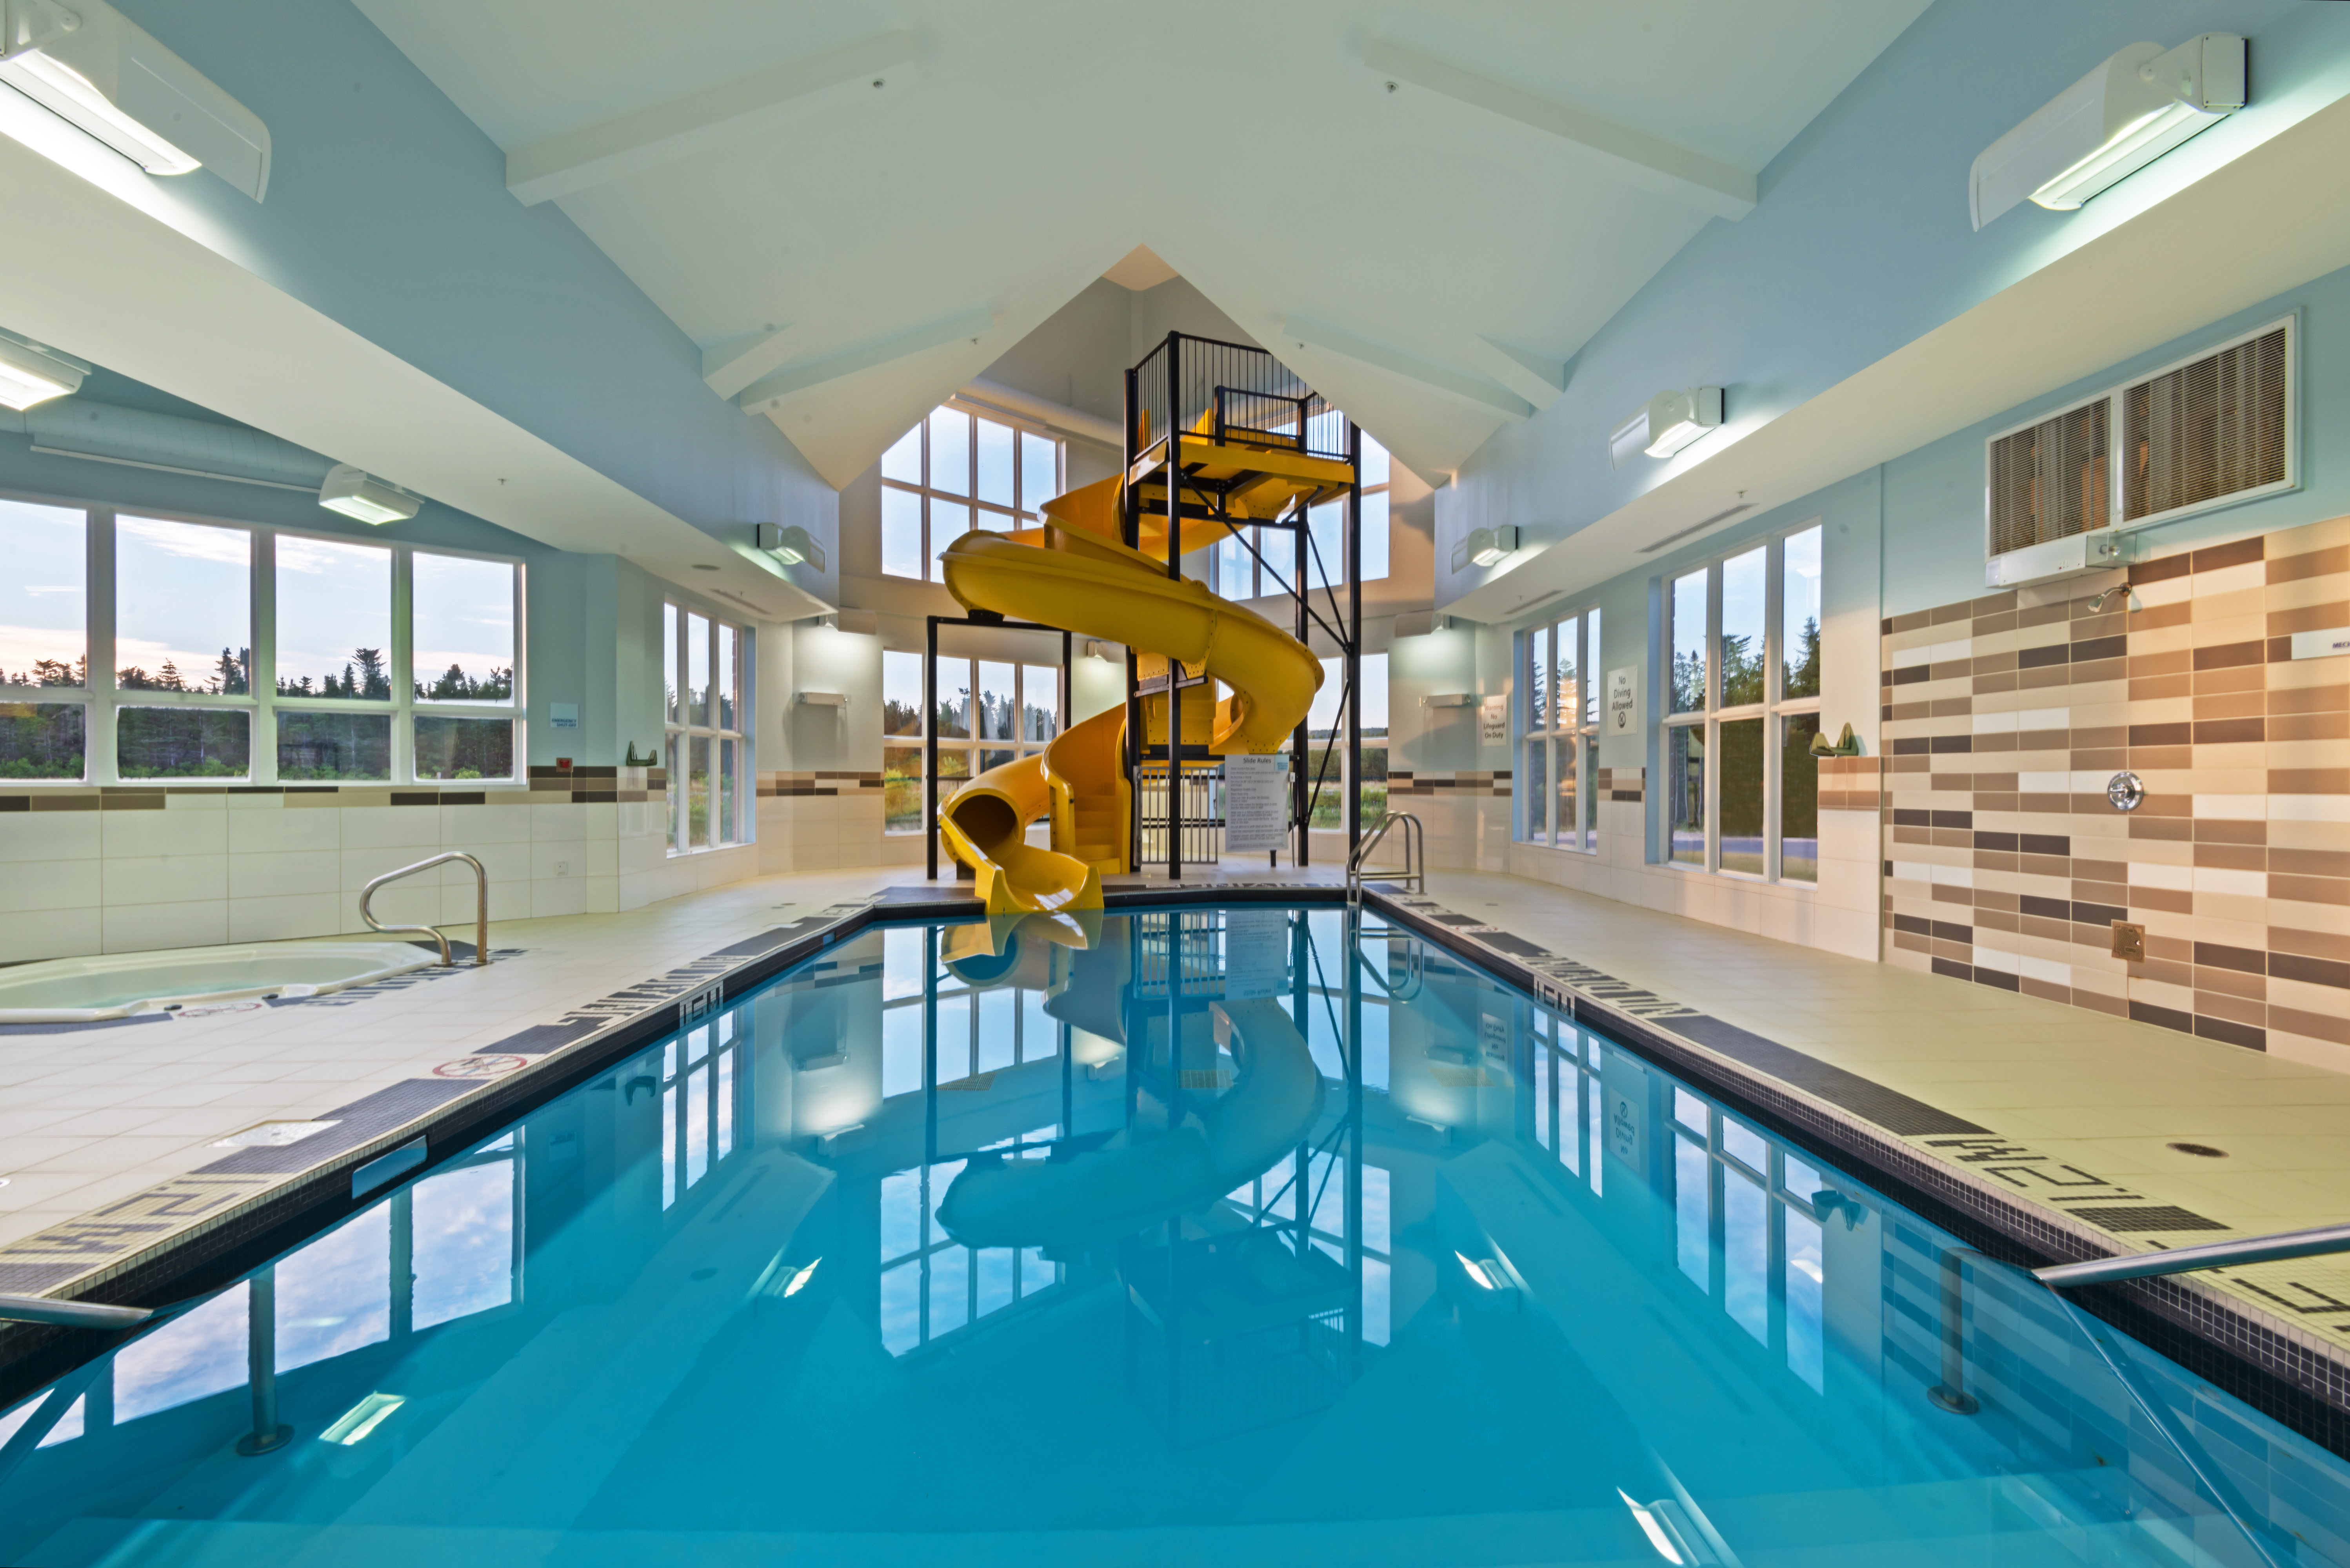 Enjoy our Indoor Pool from 5:30 am to 11:00 pm